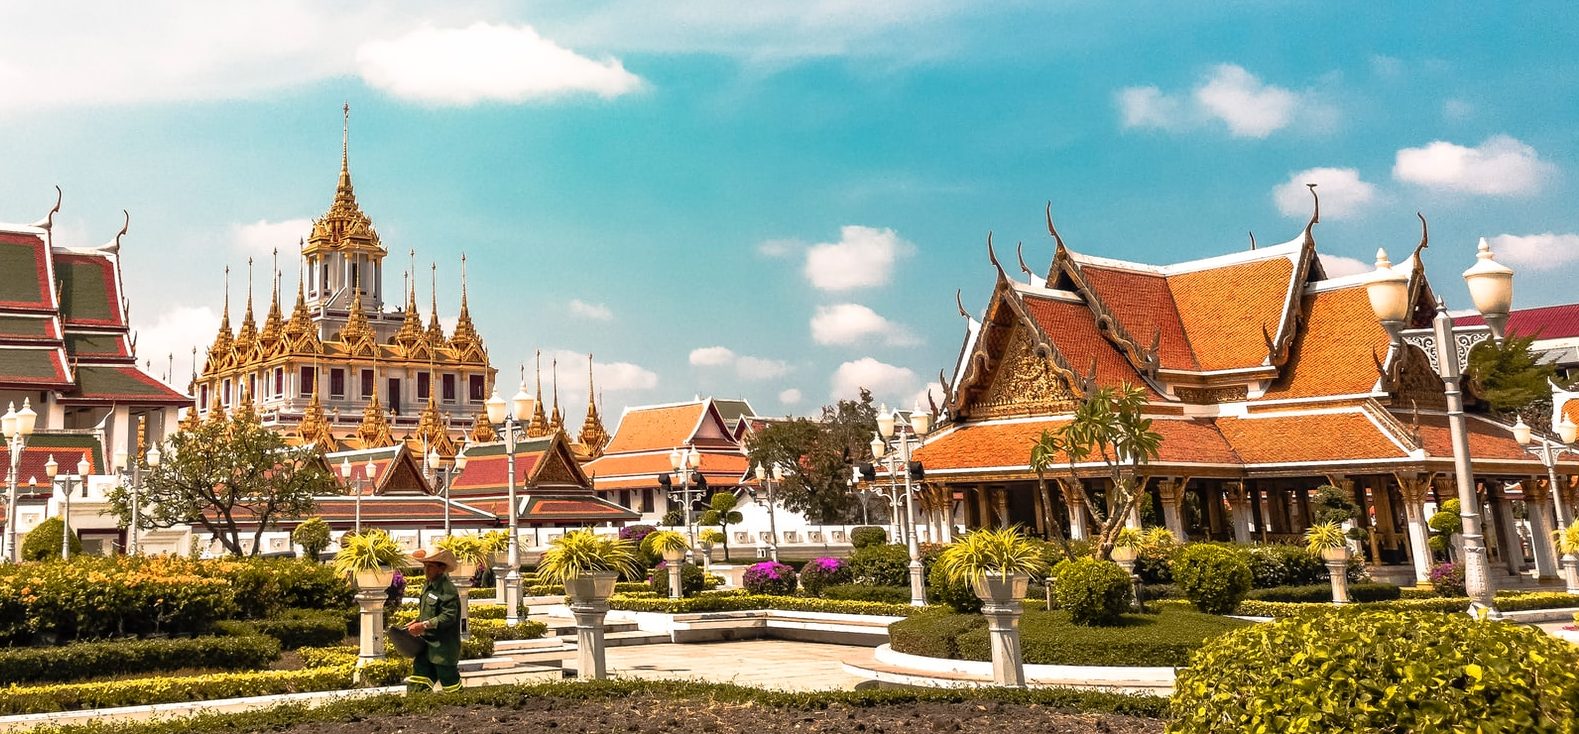 Fall in with Bangkok's Nature in These Stunning Public Parks - Traveler Dreams